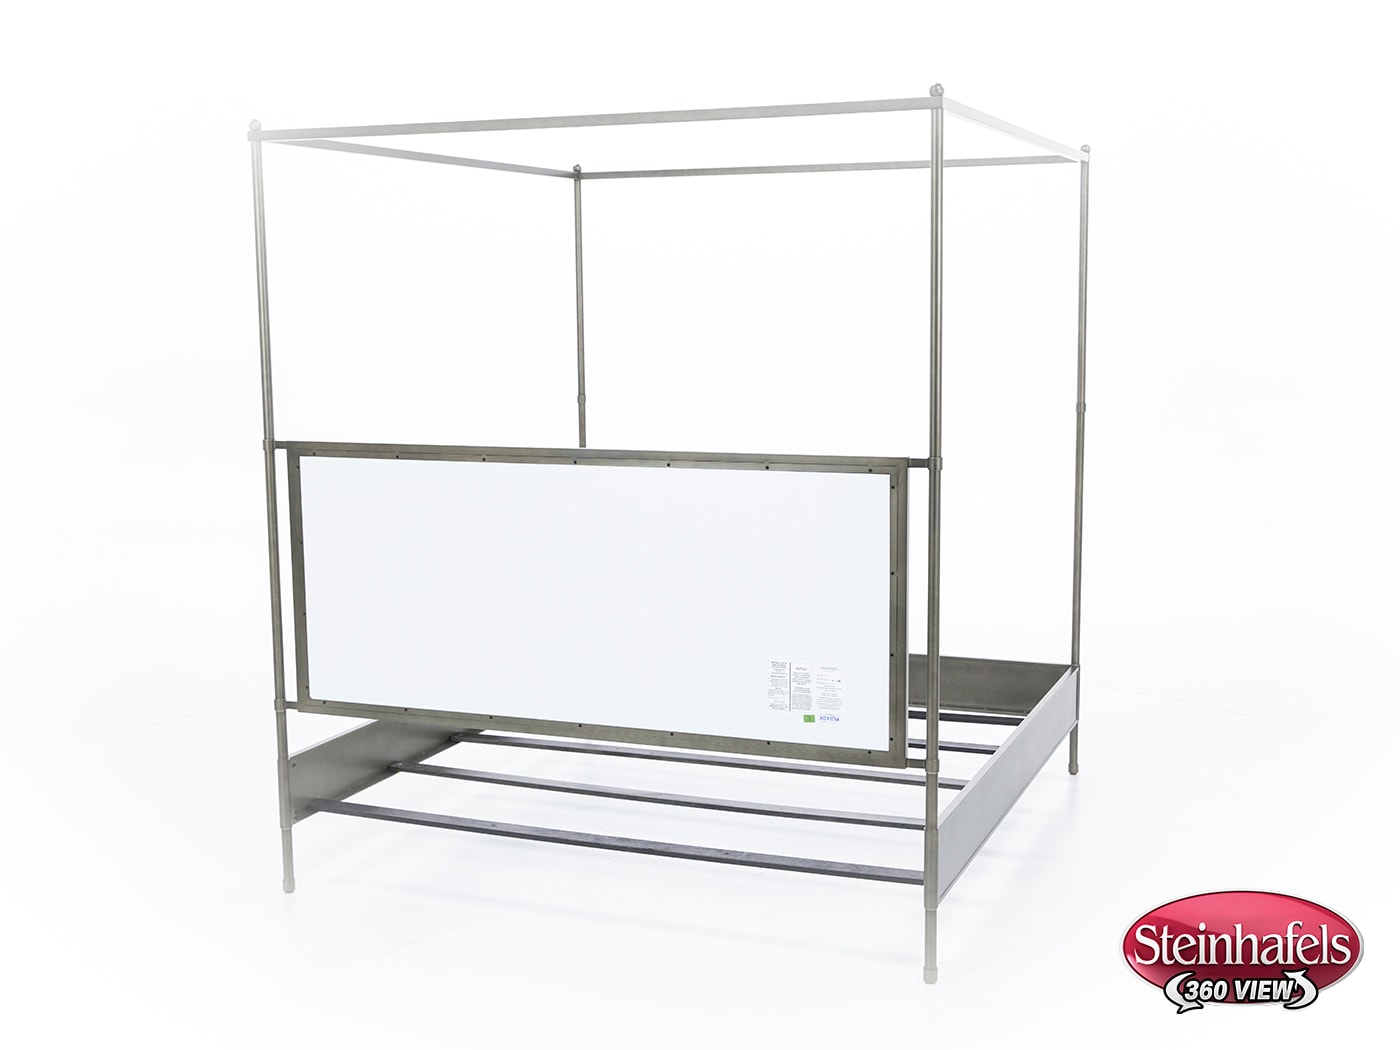 universal furniture king bed package  image pkp  